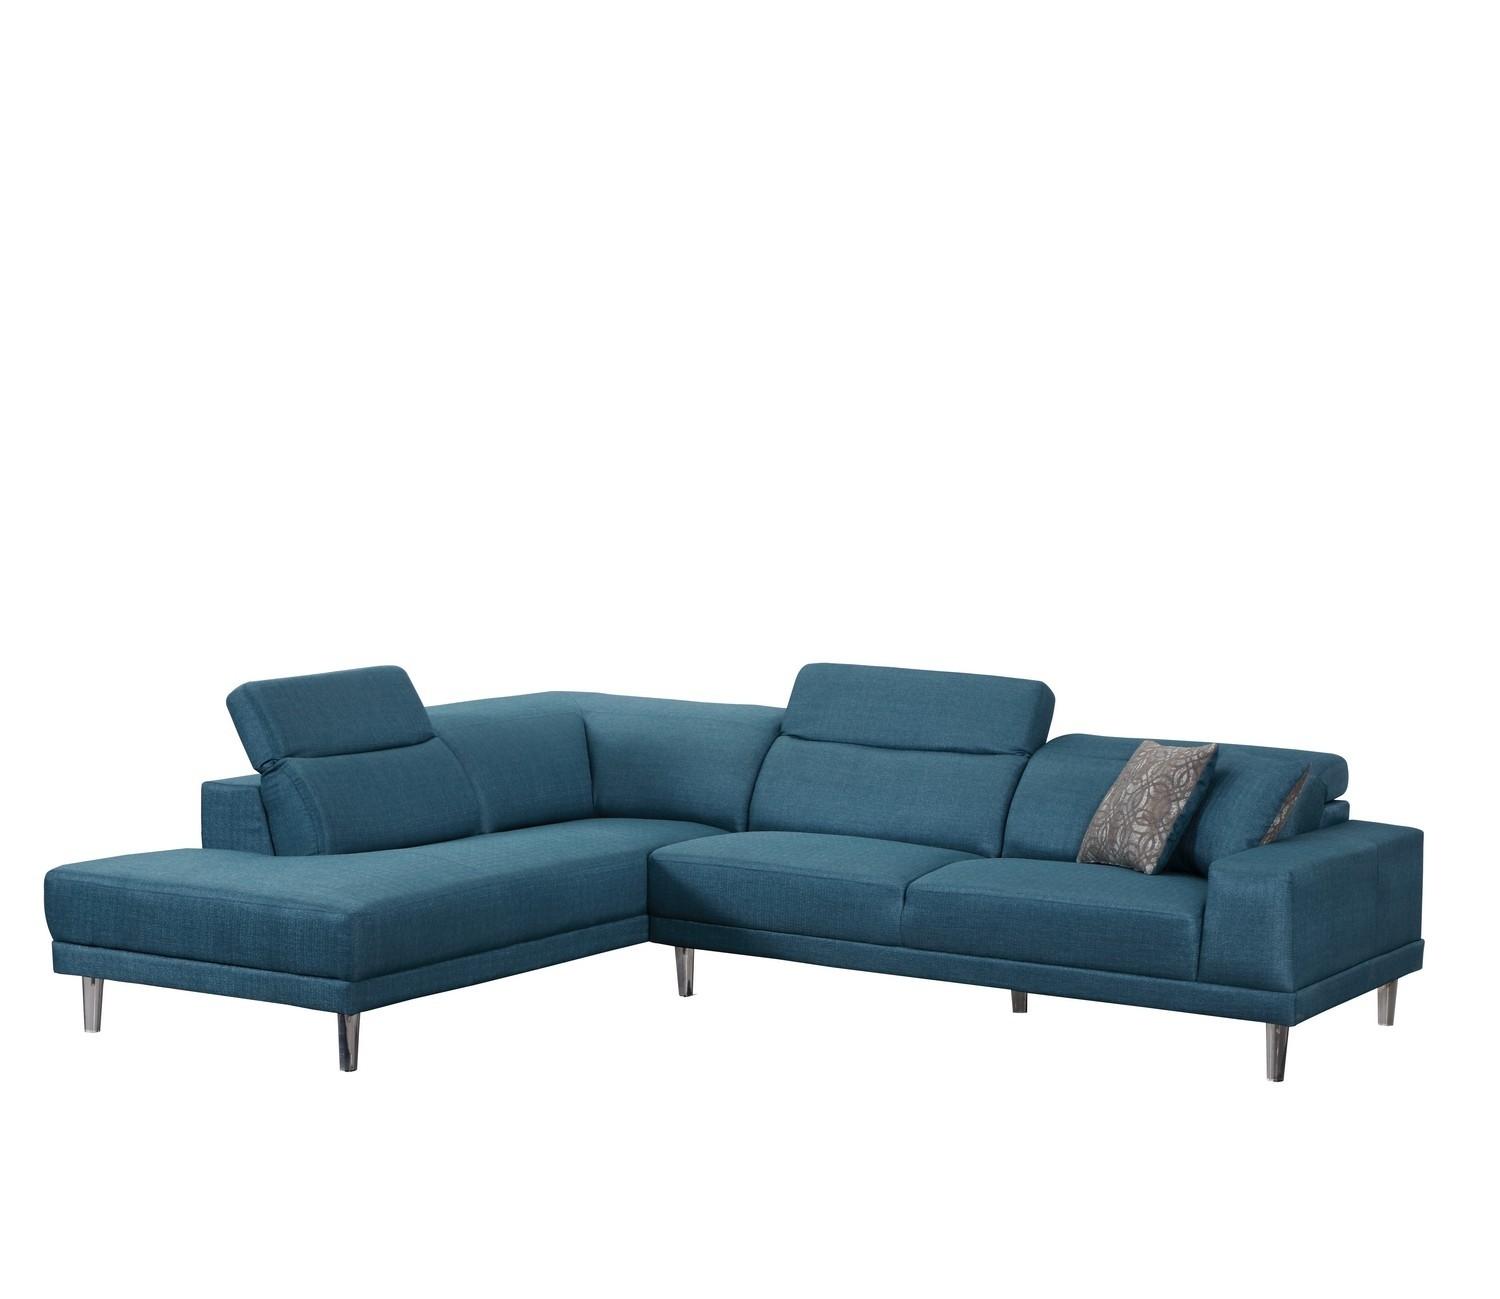 Contemporary Sectional Sofa 632 632-BLUE-LAF in Blue Fabric